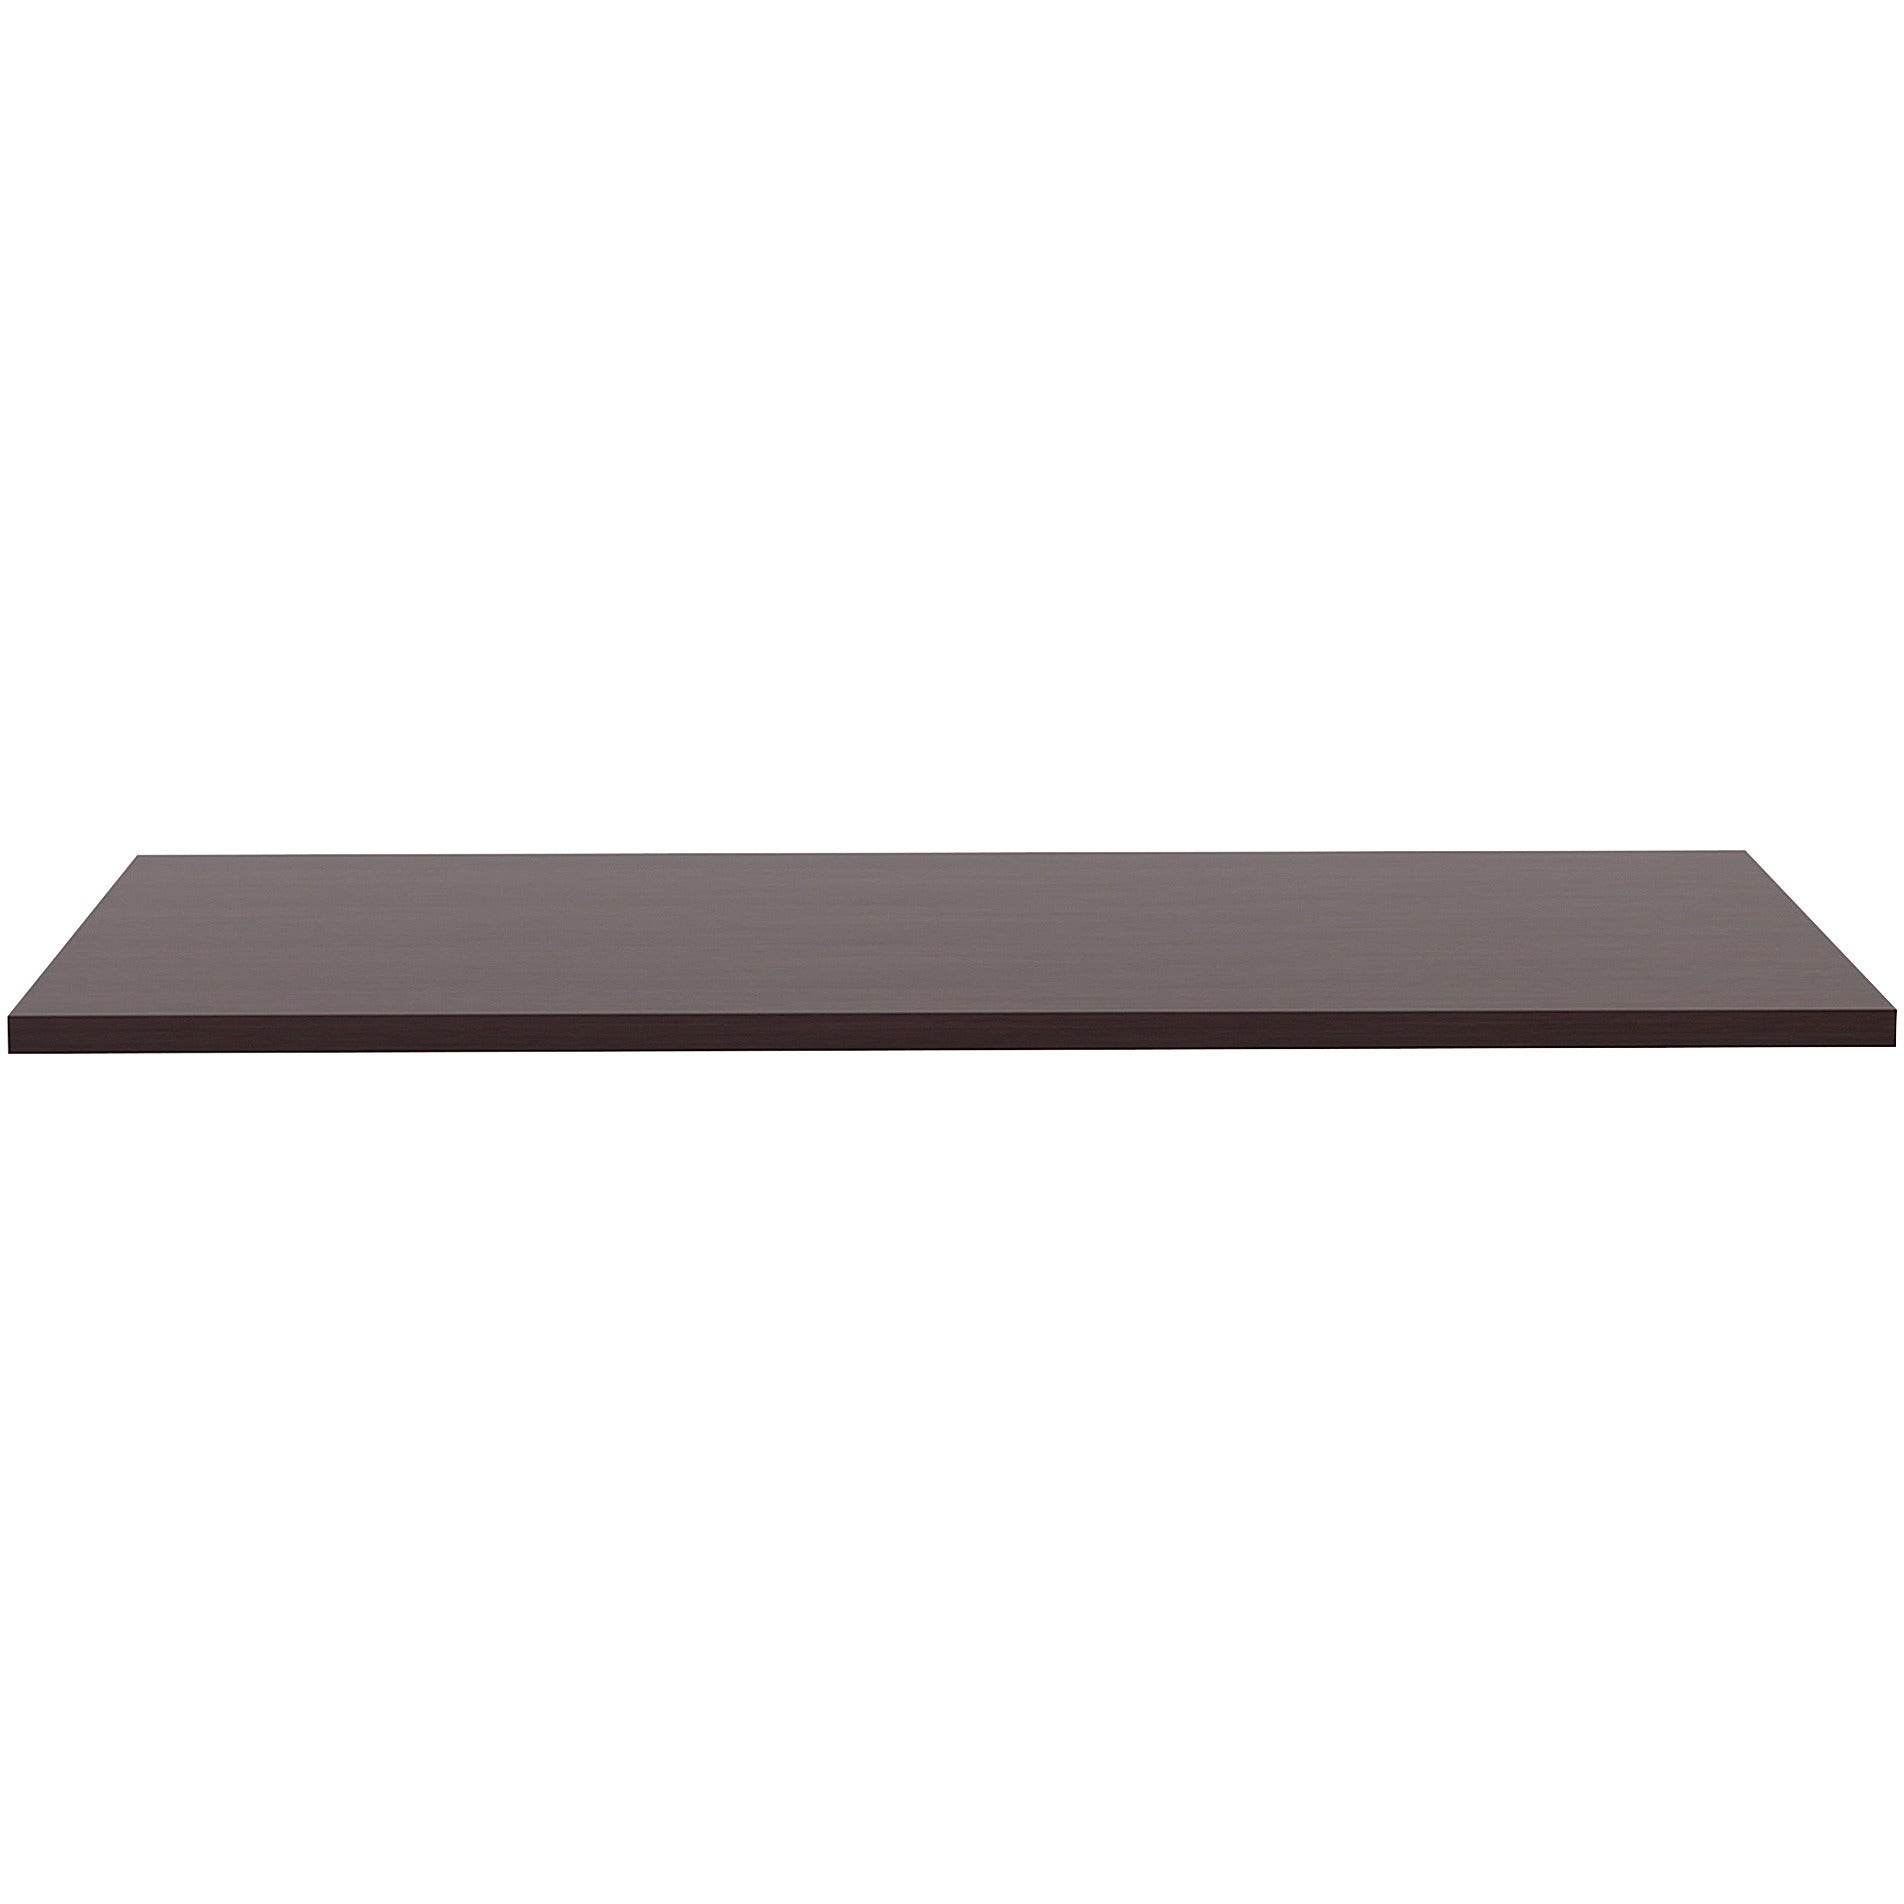 lorell-training-tabletop-for-table-topespresso-rectangle-laminated-top-adjustable-height-48-table-top-length-x-24-table-top-width-x-1-table-top-thickness-assembly-required-1-each_llr59639 - 2